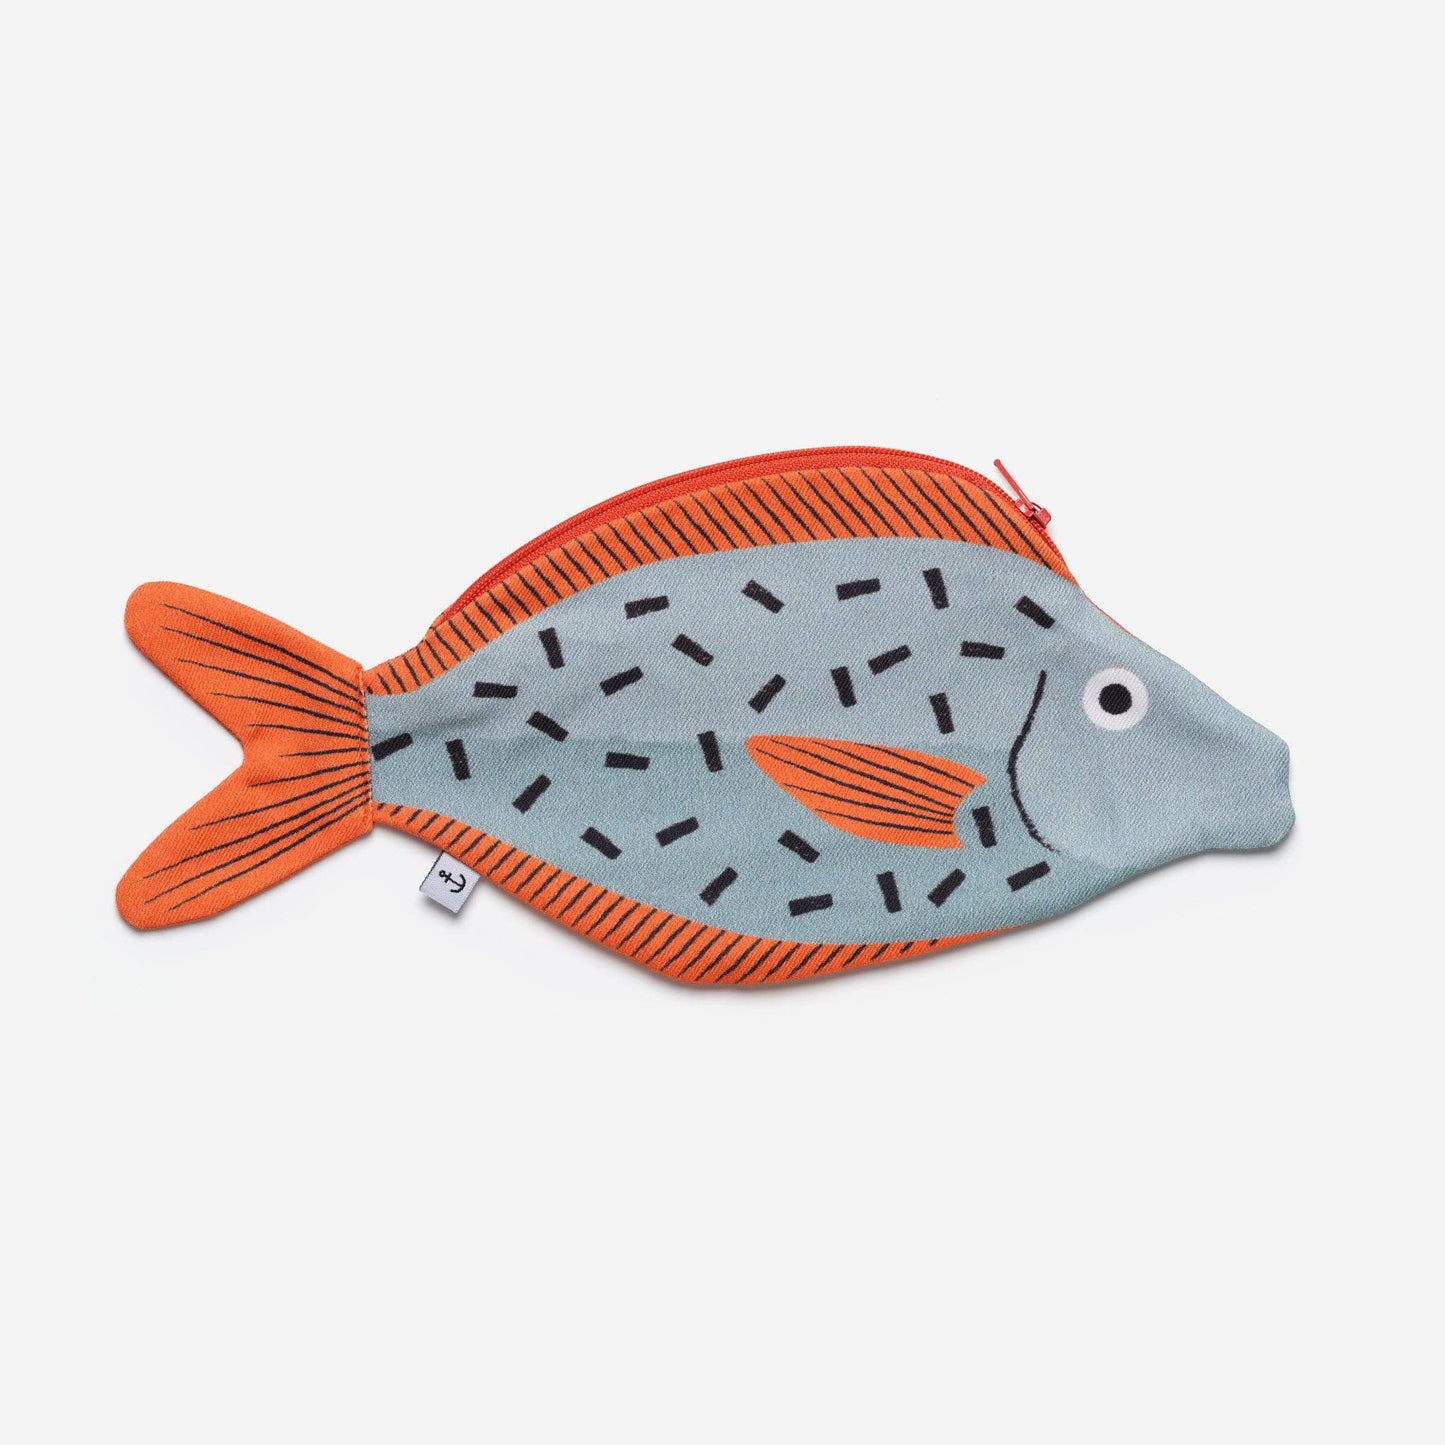 Porea fish zippered pouch --- body is blue with black marking details, fins are orange with stripes  